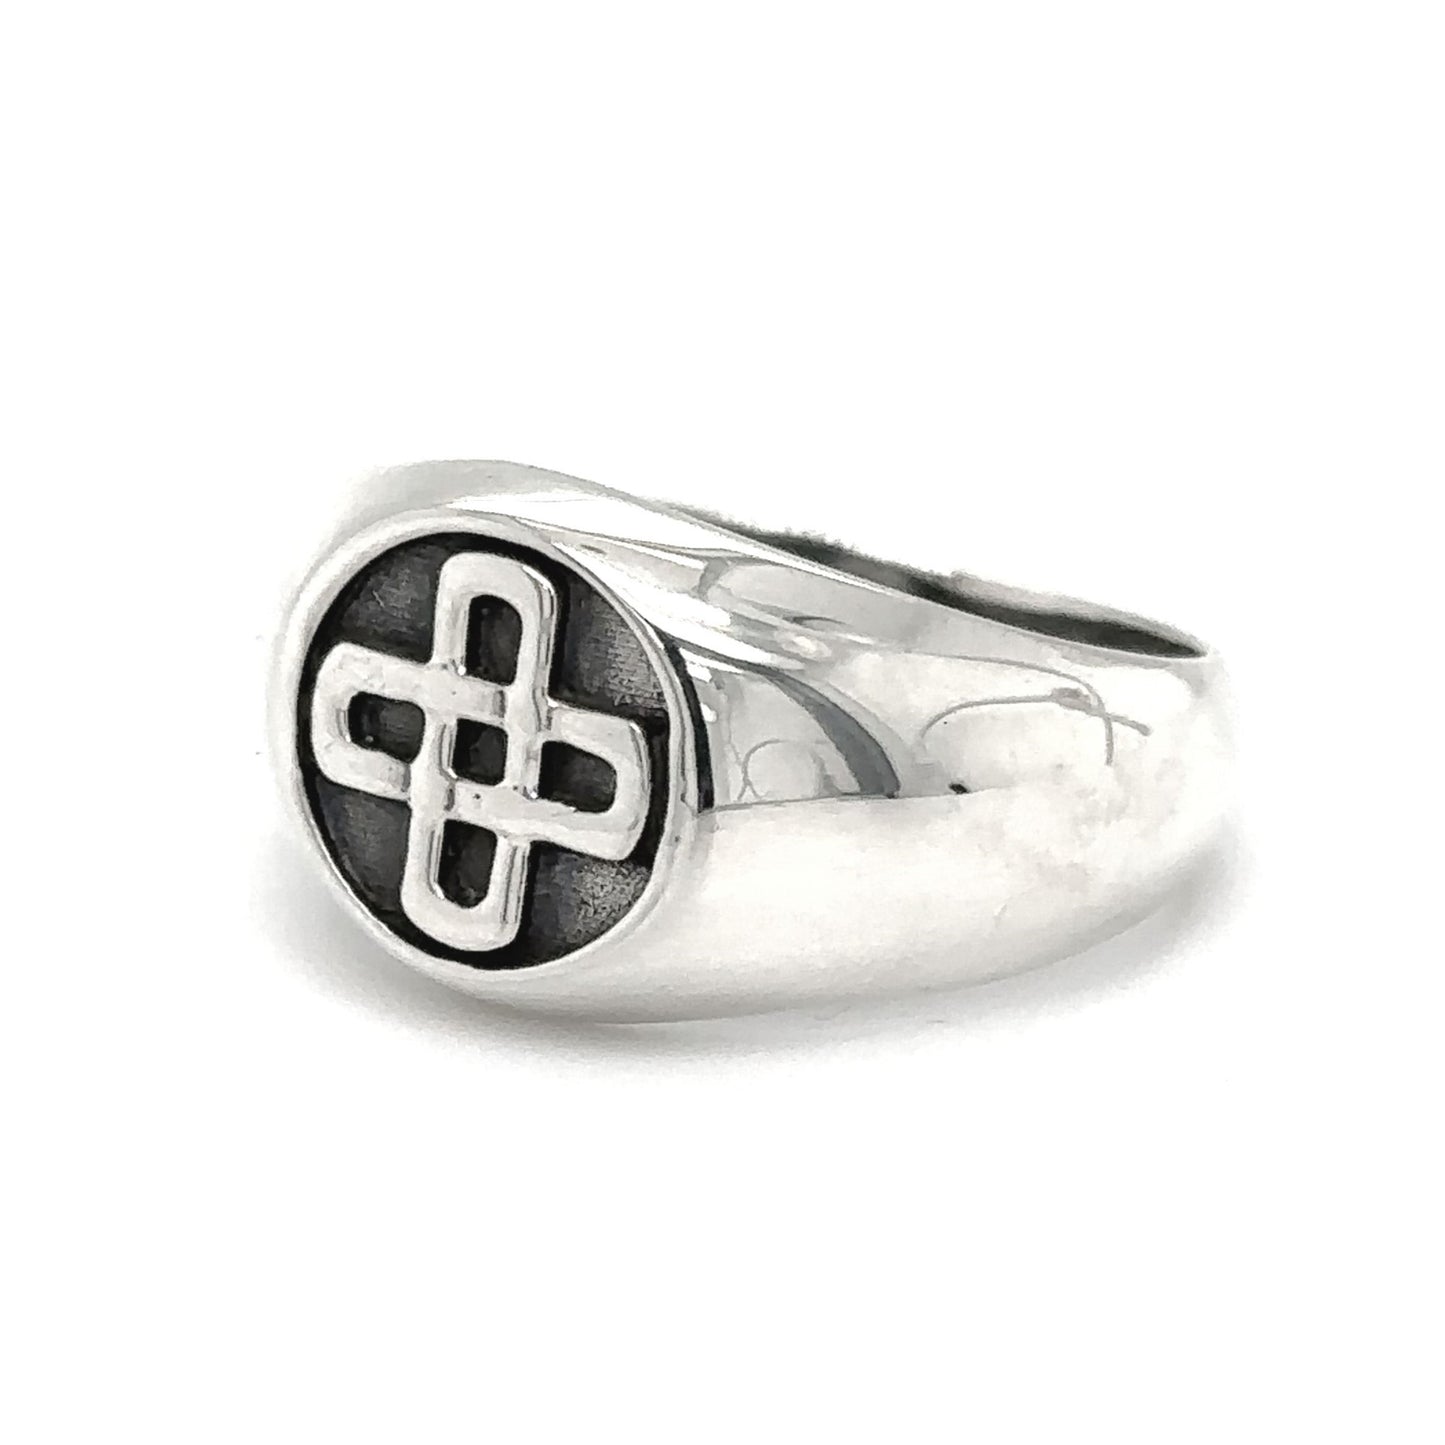 An oxidized silver Celtic Solomon's Knot signet ring with a cross on it, making it a stunning statement piece that incorporates the timeless design of Solomon's Knot.